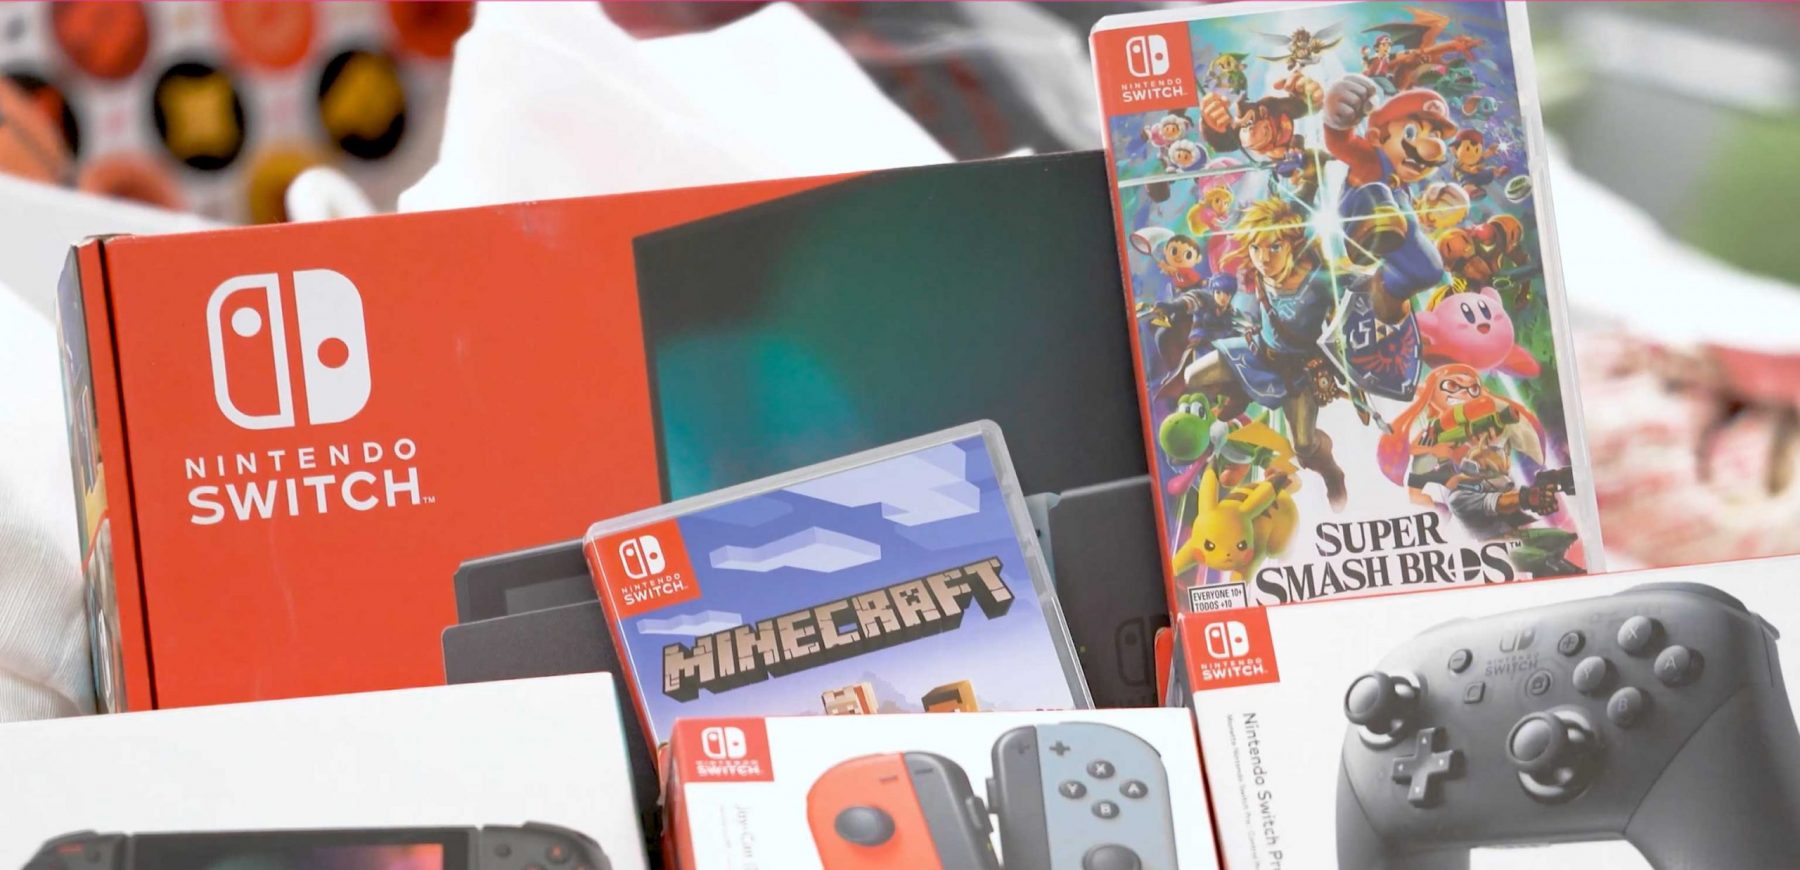 Krazy Bins Discounted Nintendo multple video games and controller boxes on top of each other